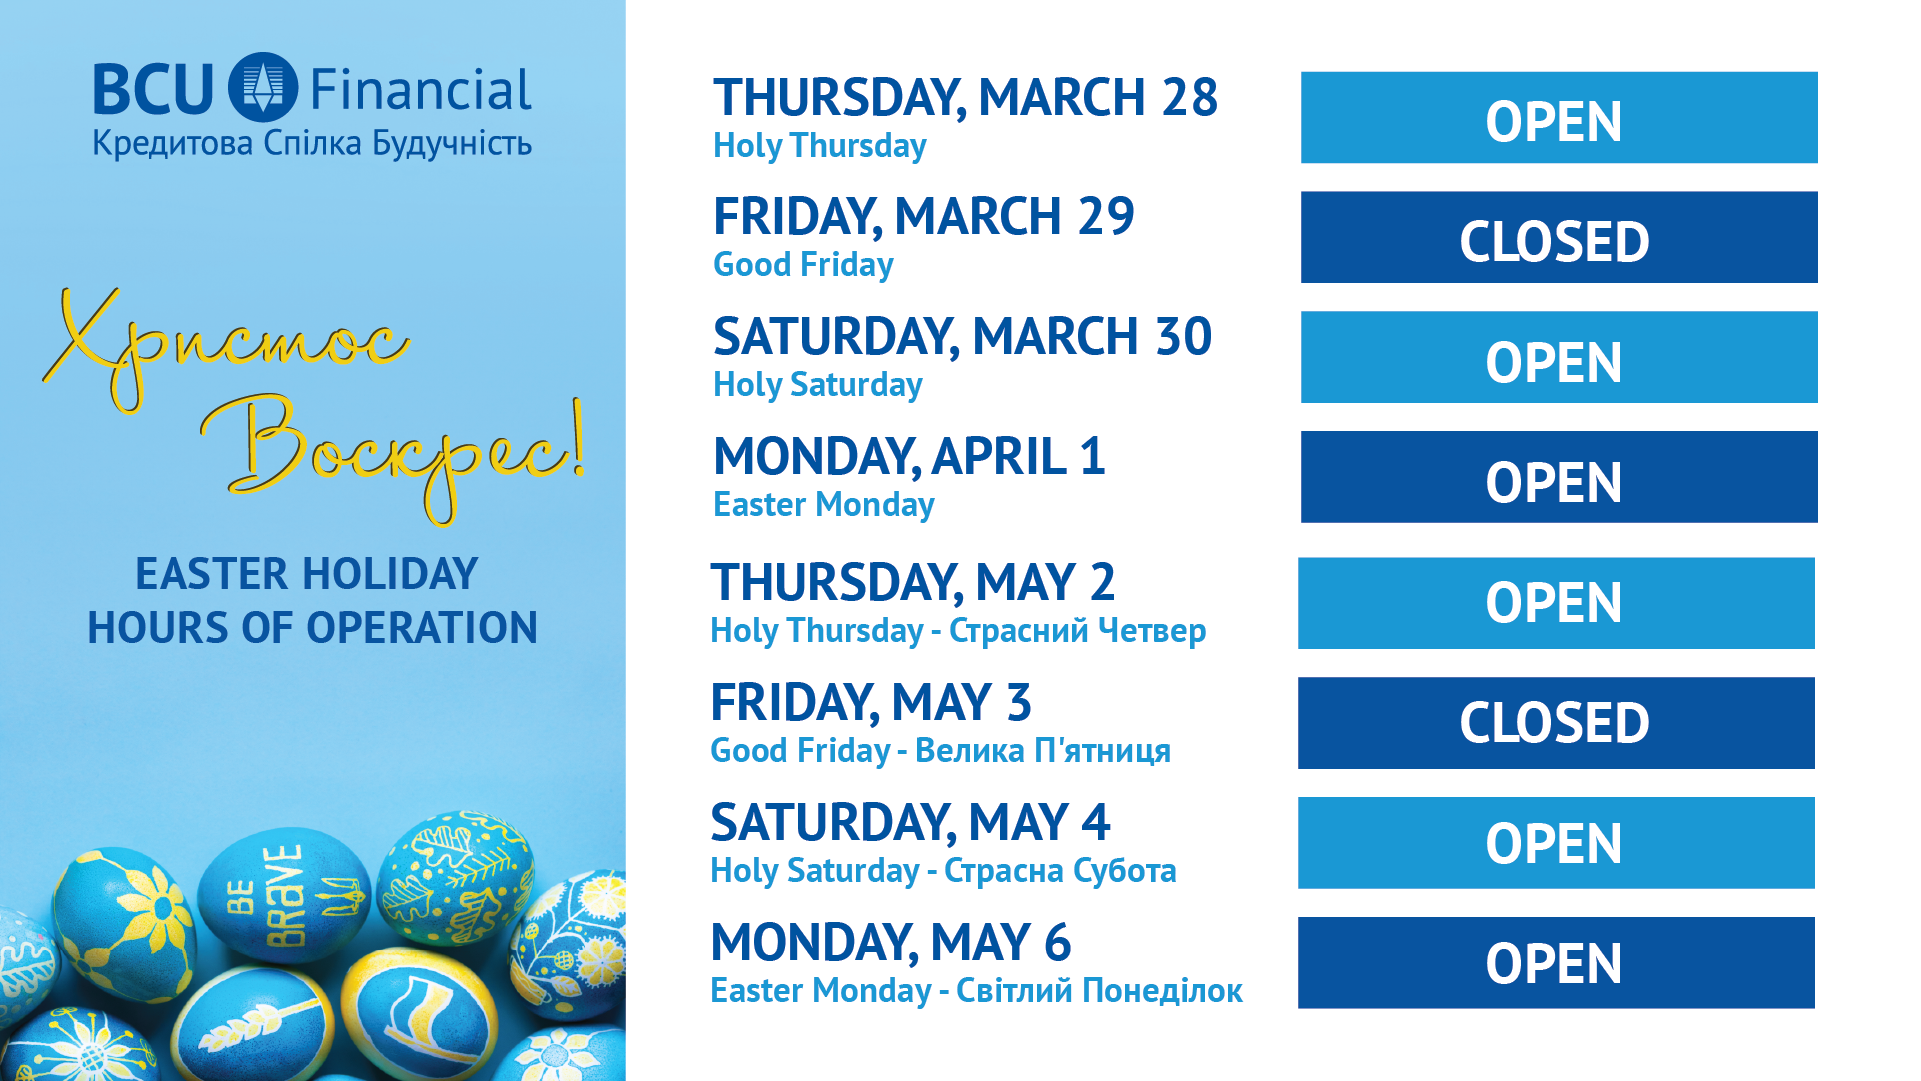 BCU Easter Holiday Hours of Operation new